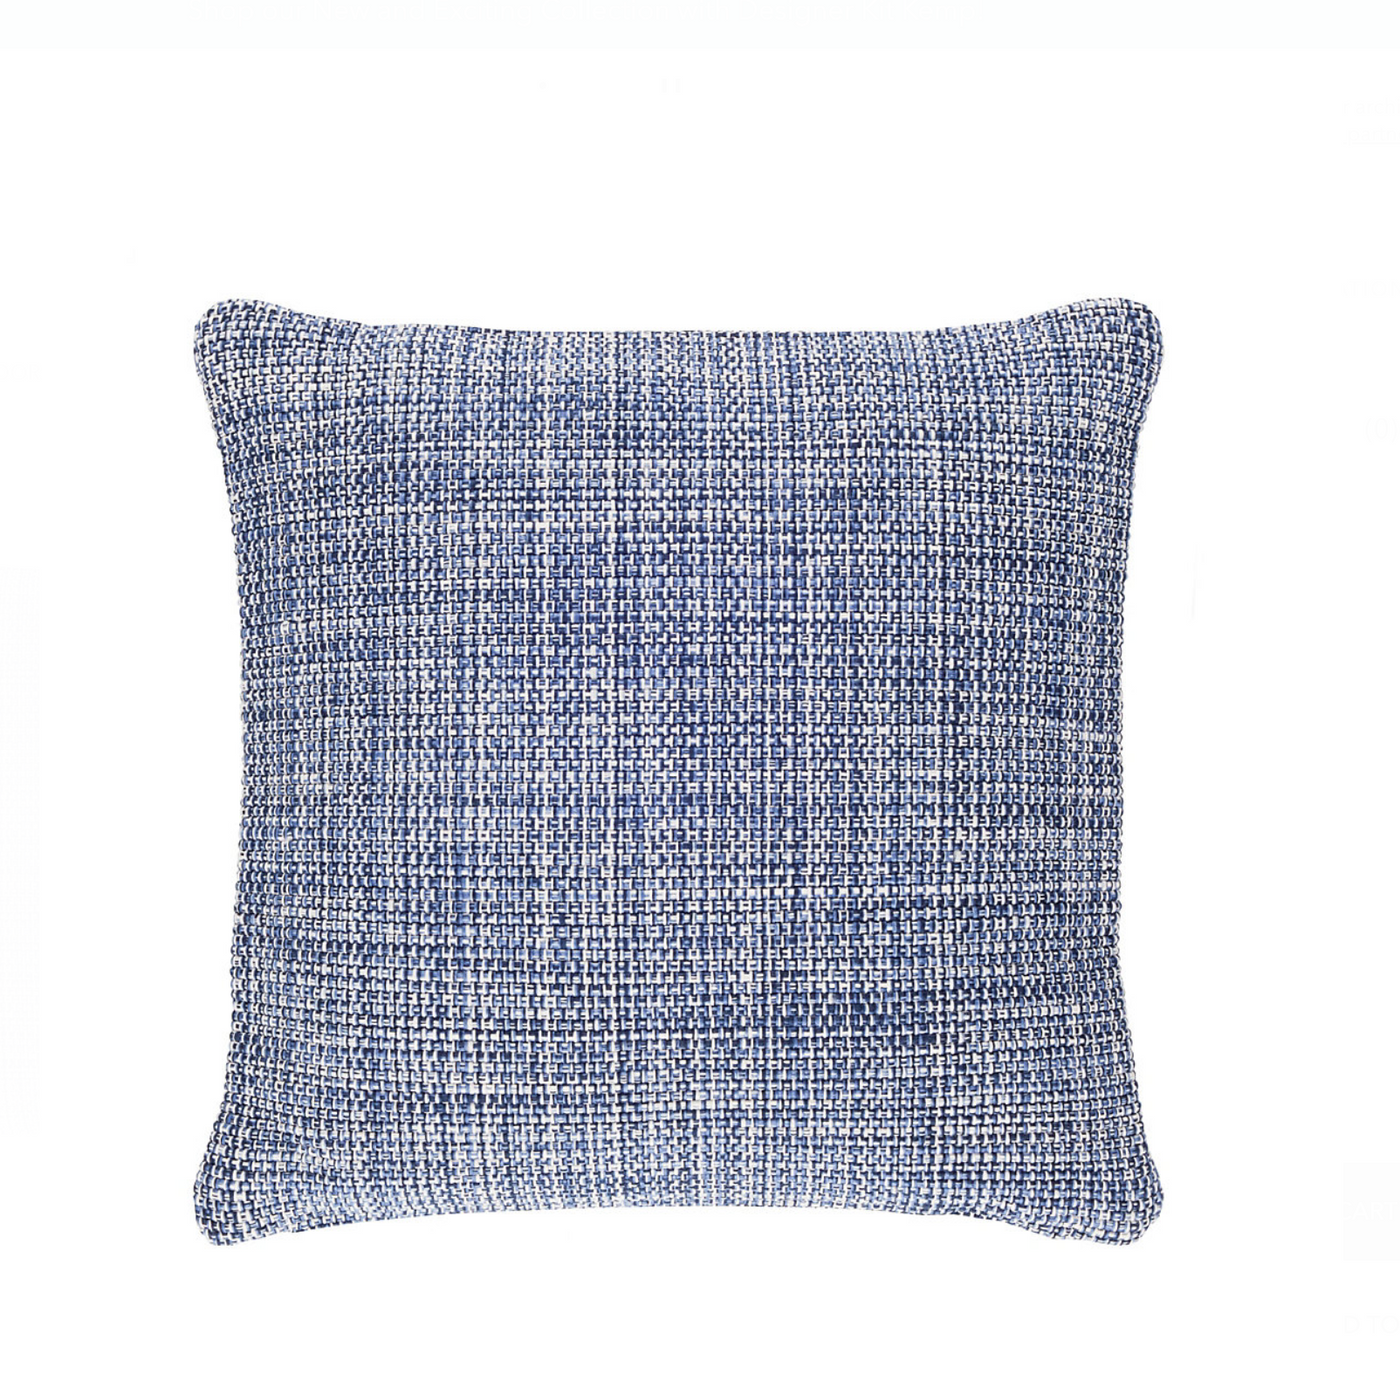 PILLOW DECORATIVE INDOOR/OUTDOOR TRICOLOR-MARLED (Available in Colors and Sizes)